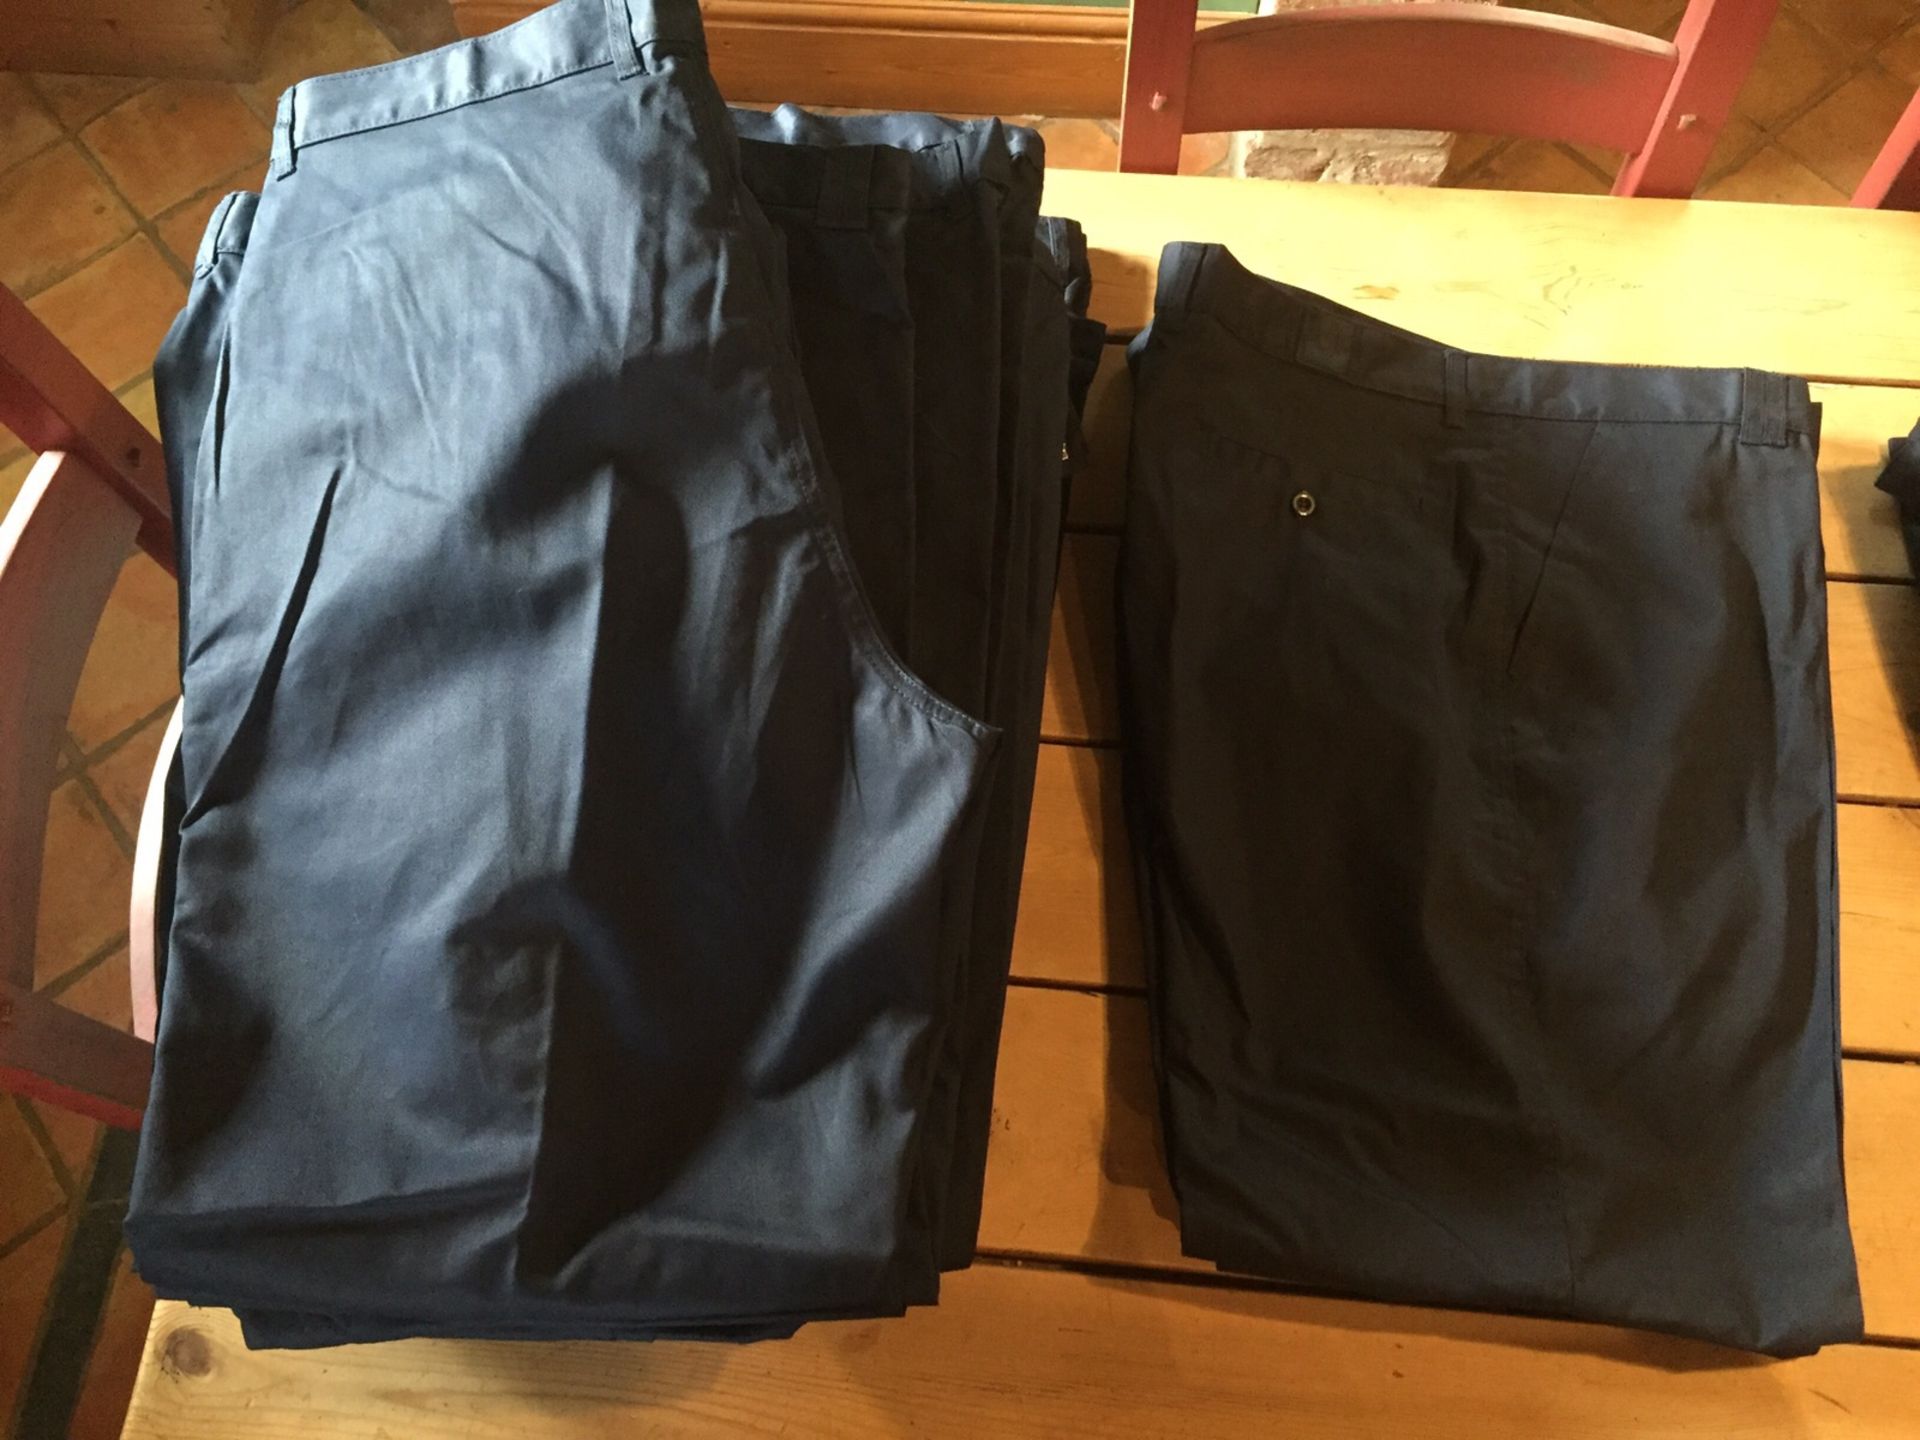 Job Lot 62 Pairs of Brand New mens UNEEK work trousers various sizes in blue - Image 3 of 10